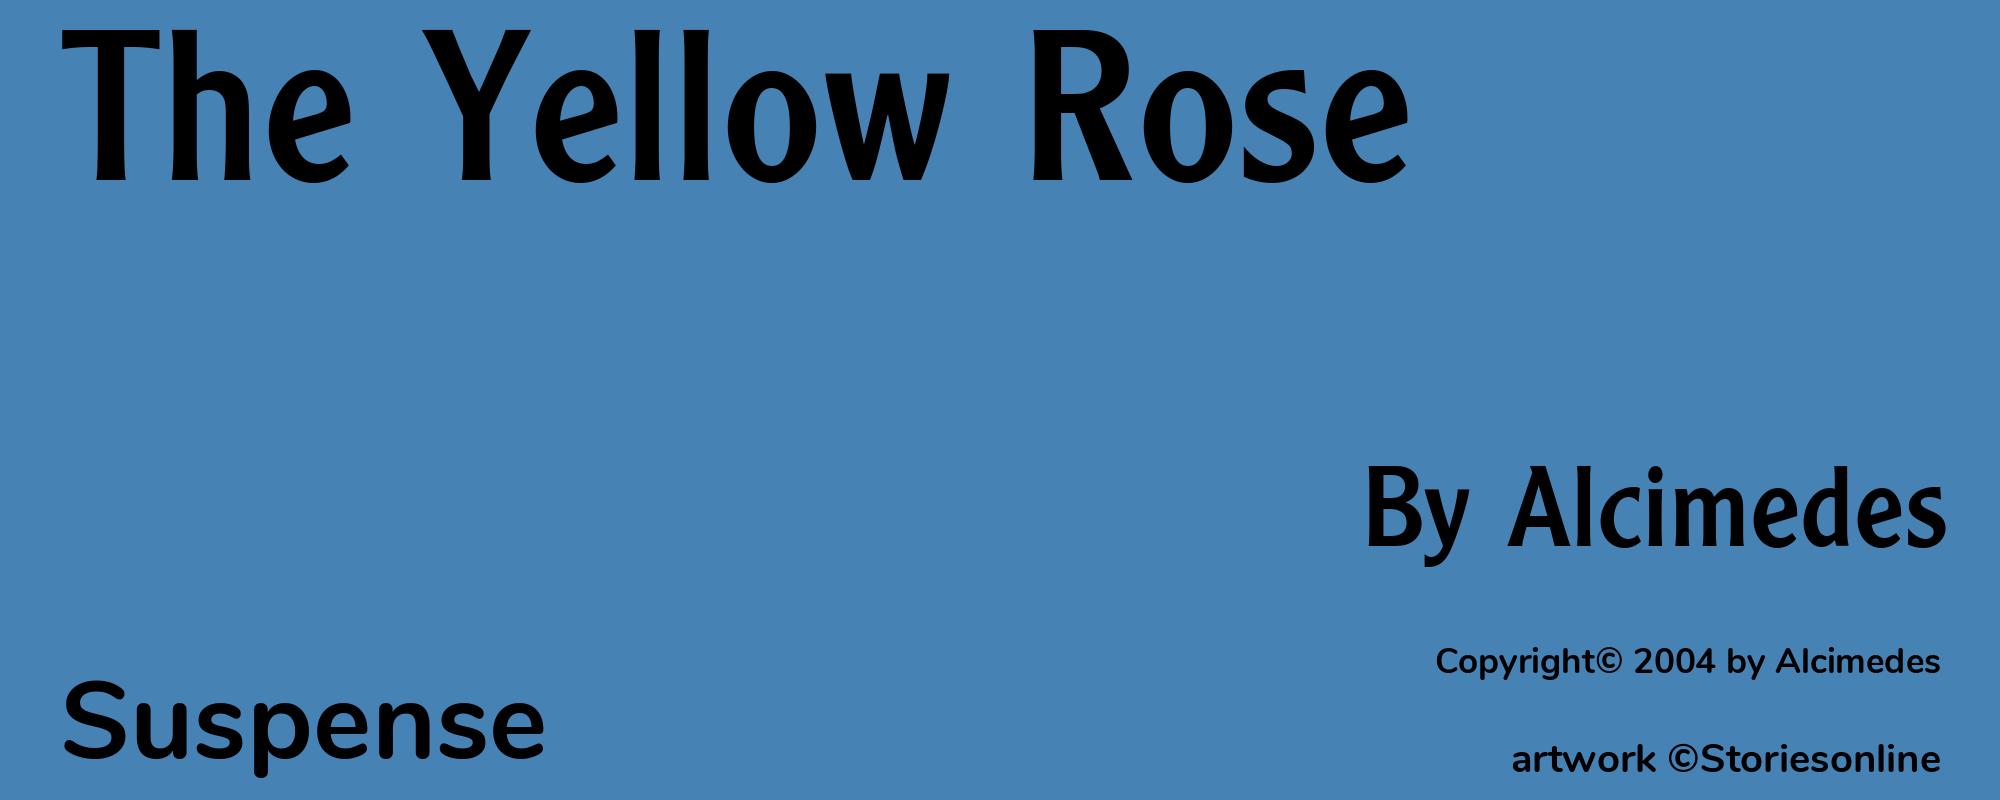 The Yellow Rose - Cover